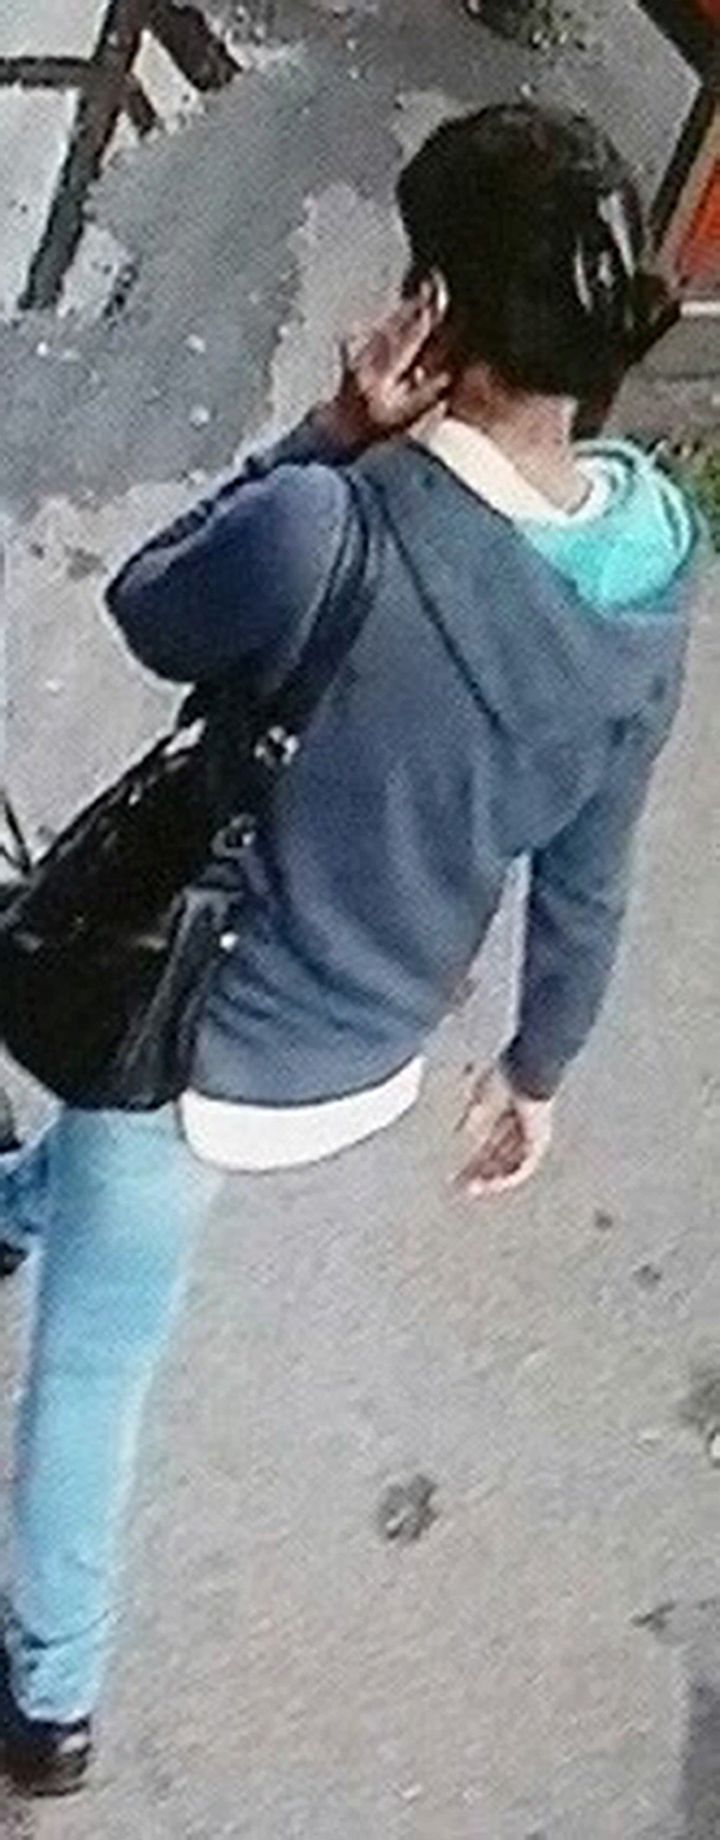 Police are yet to locate Kaur's black handbag seen in this image of her on the day before she went missing 